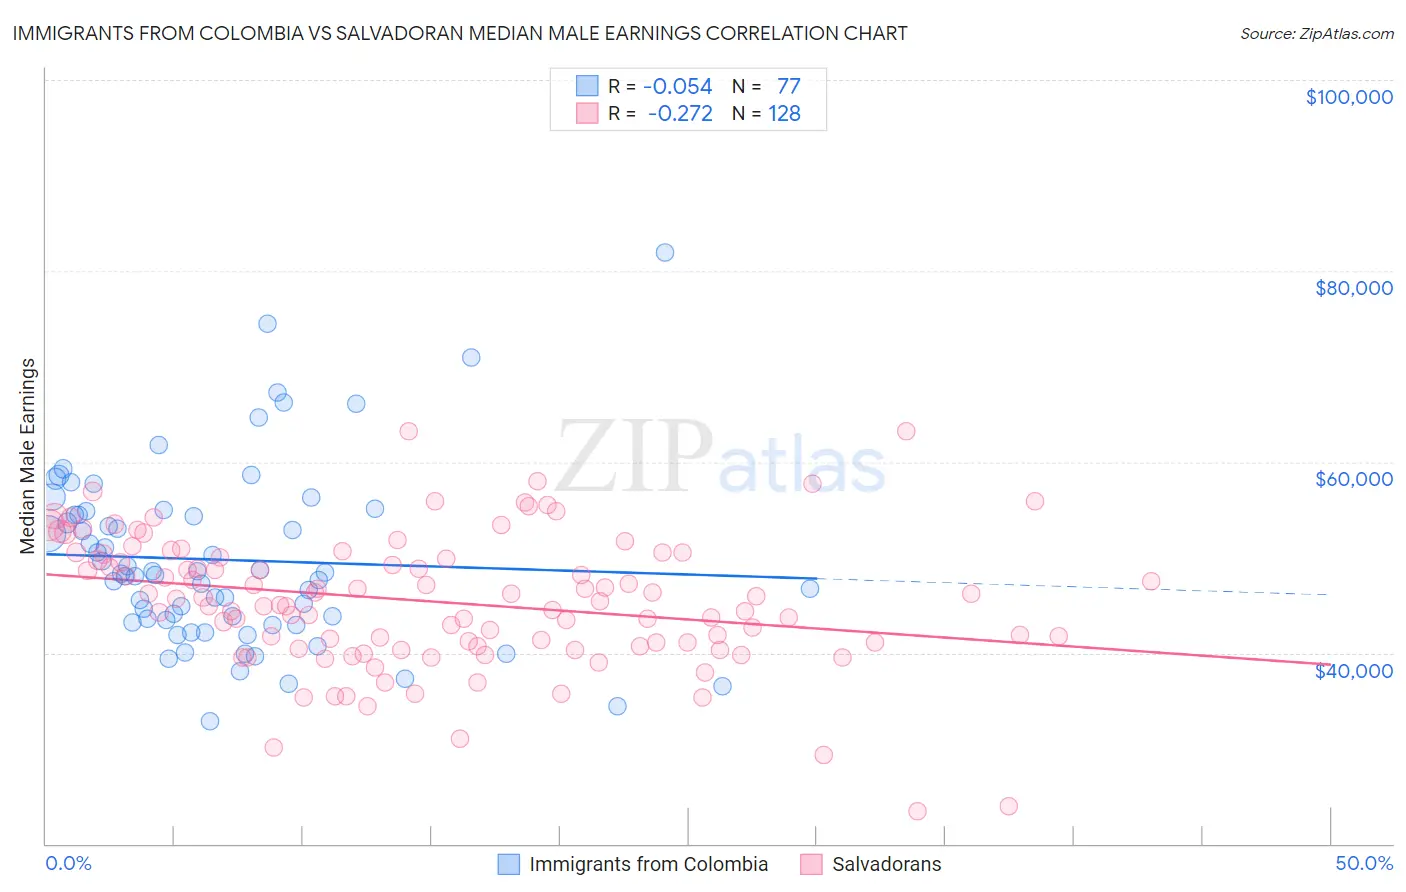 Immigrants from Colombia vs Salvadoran Median Male Earnings